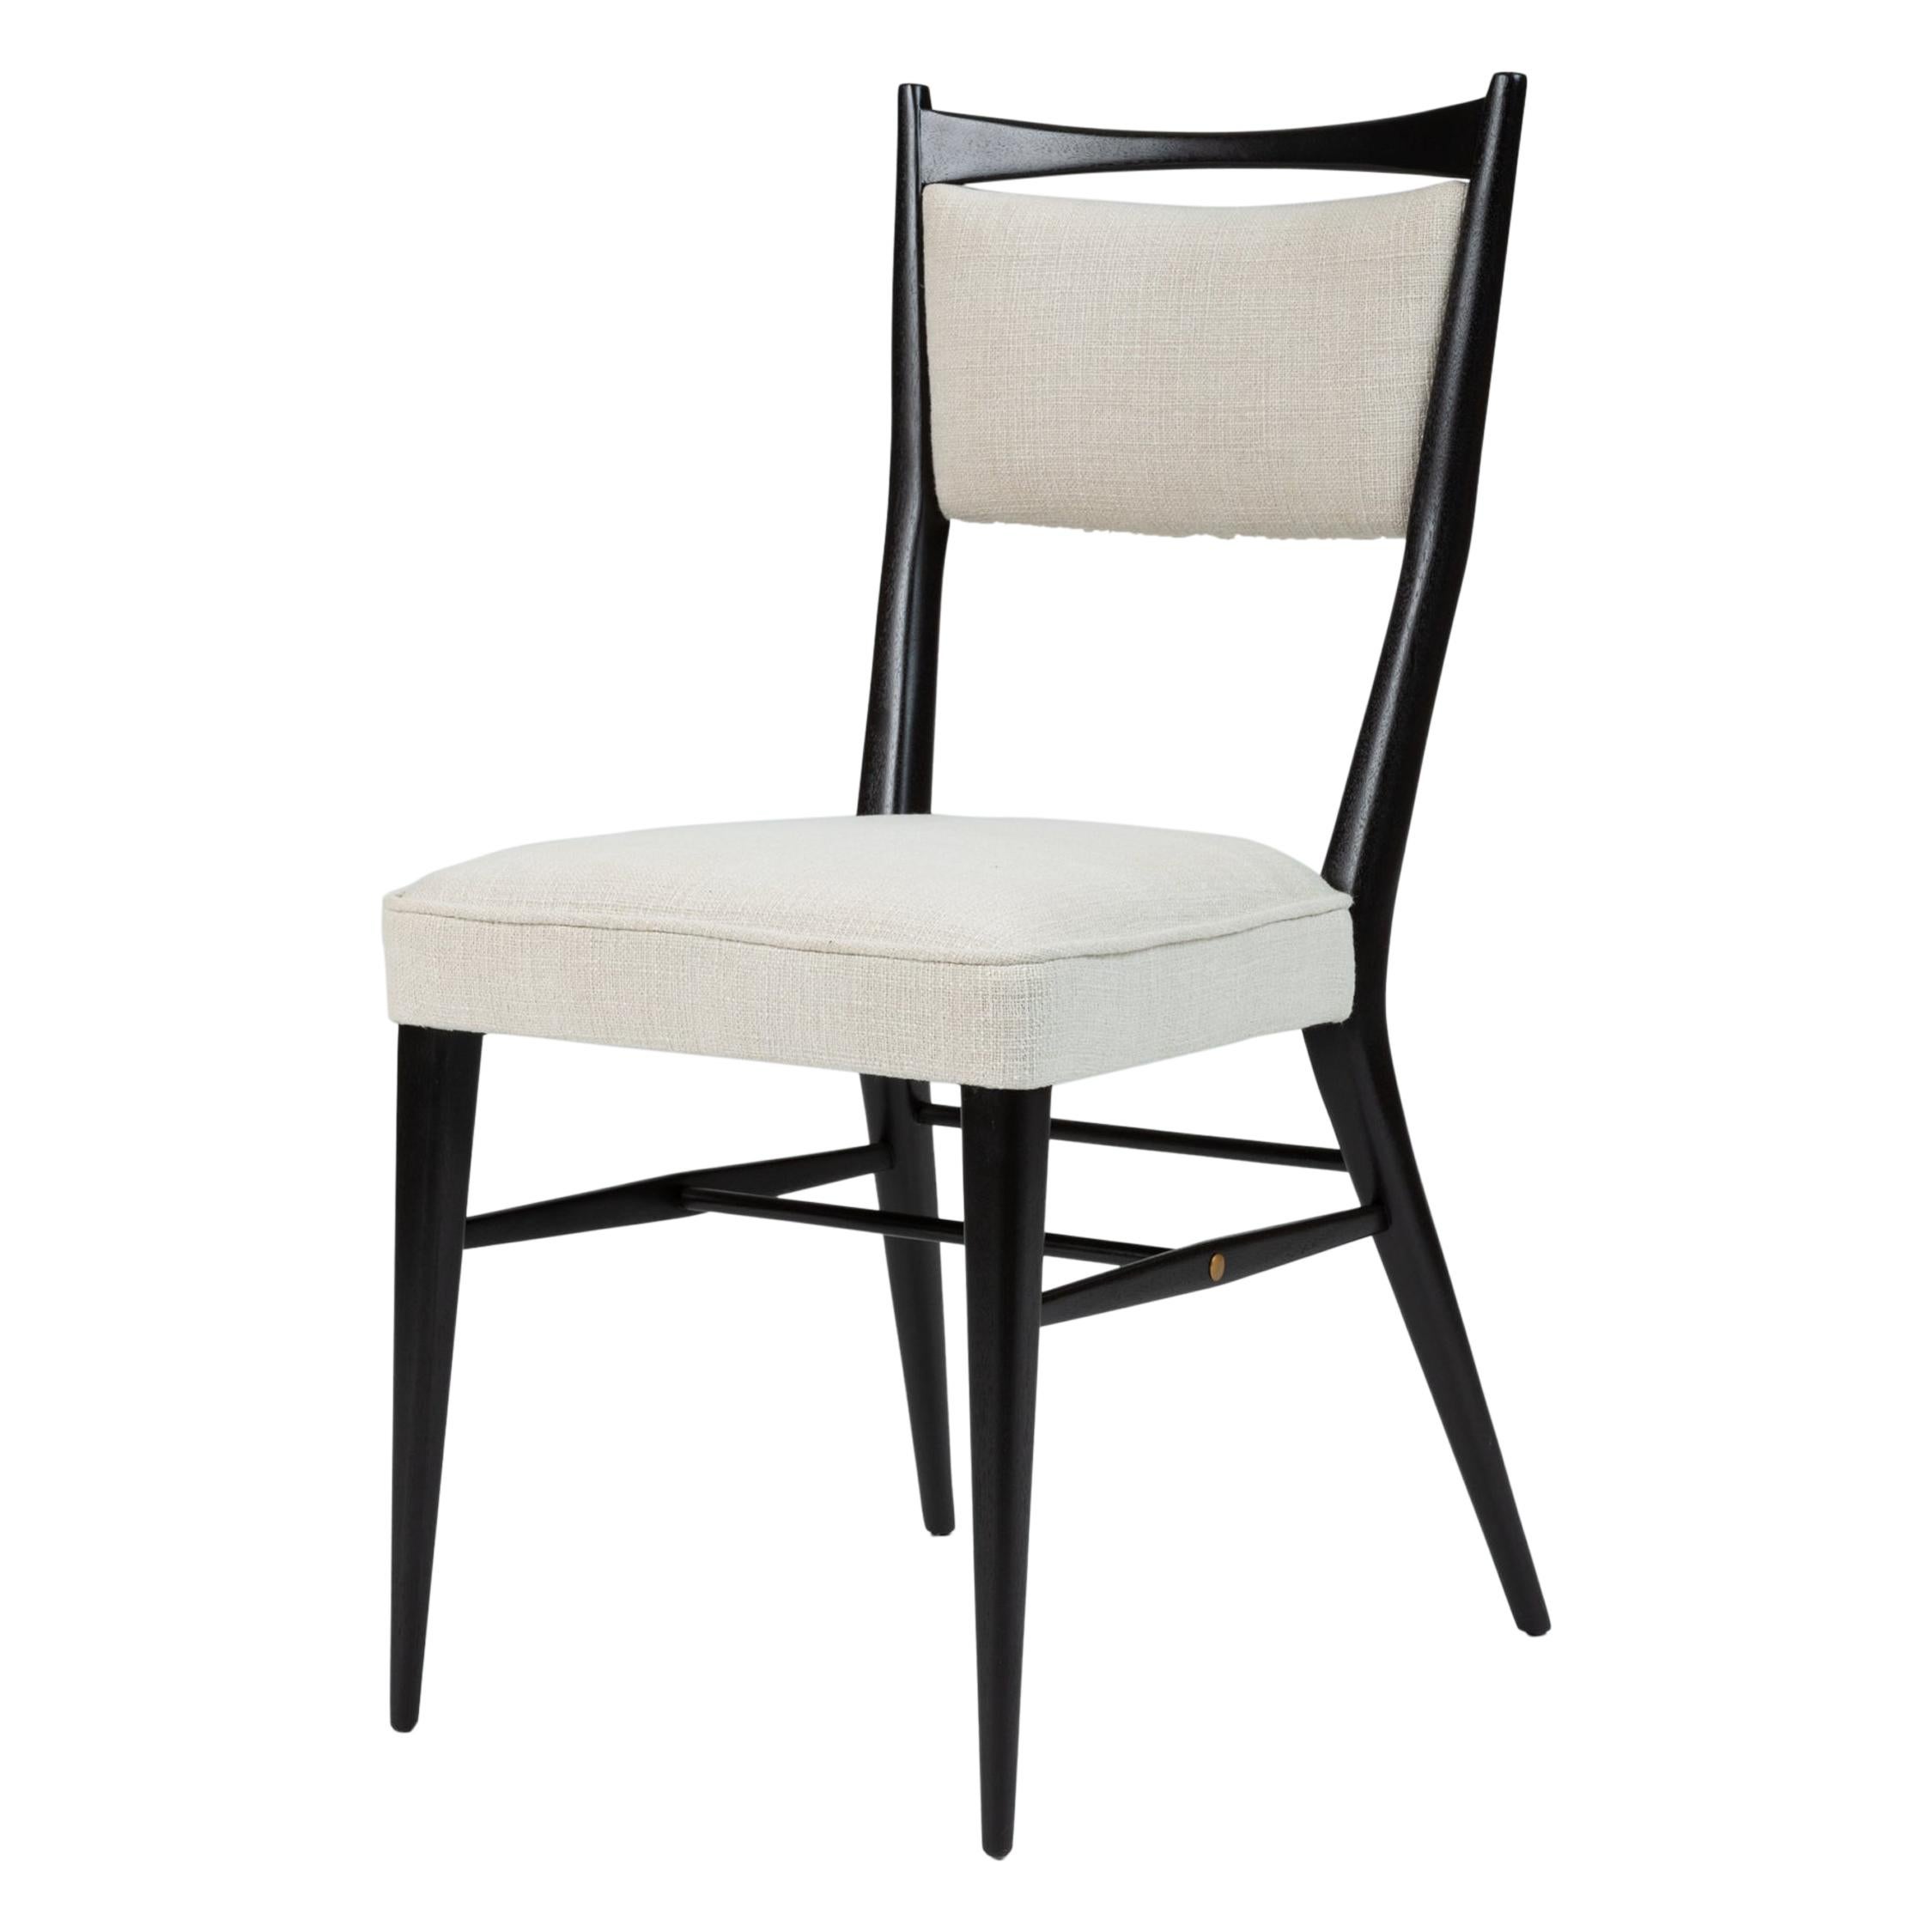 Connoisseur Group Side Chair by Paul McCobb for H. Sacks and Sons